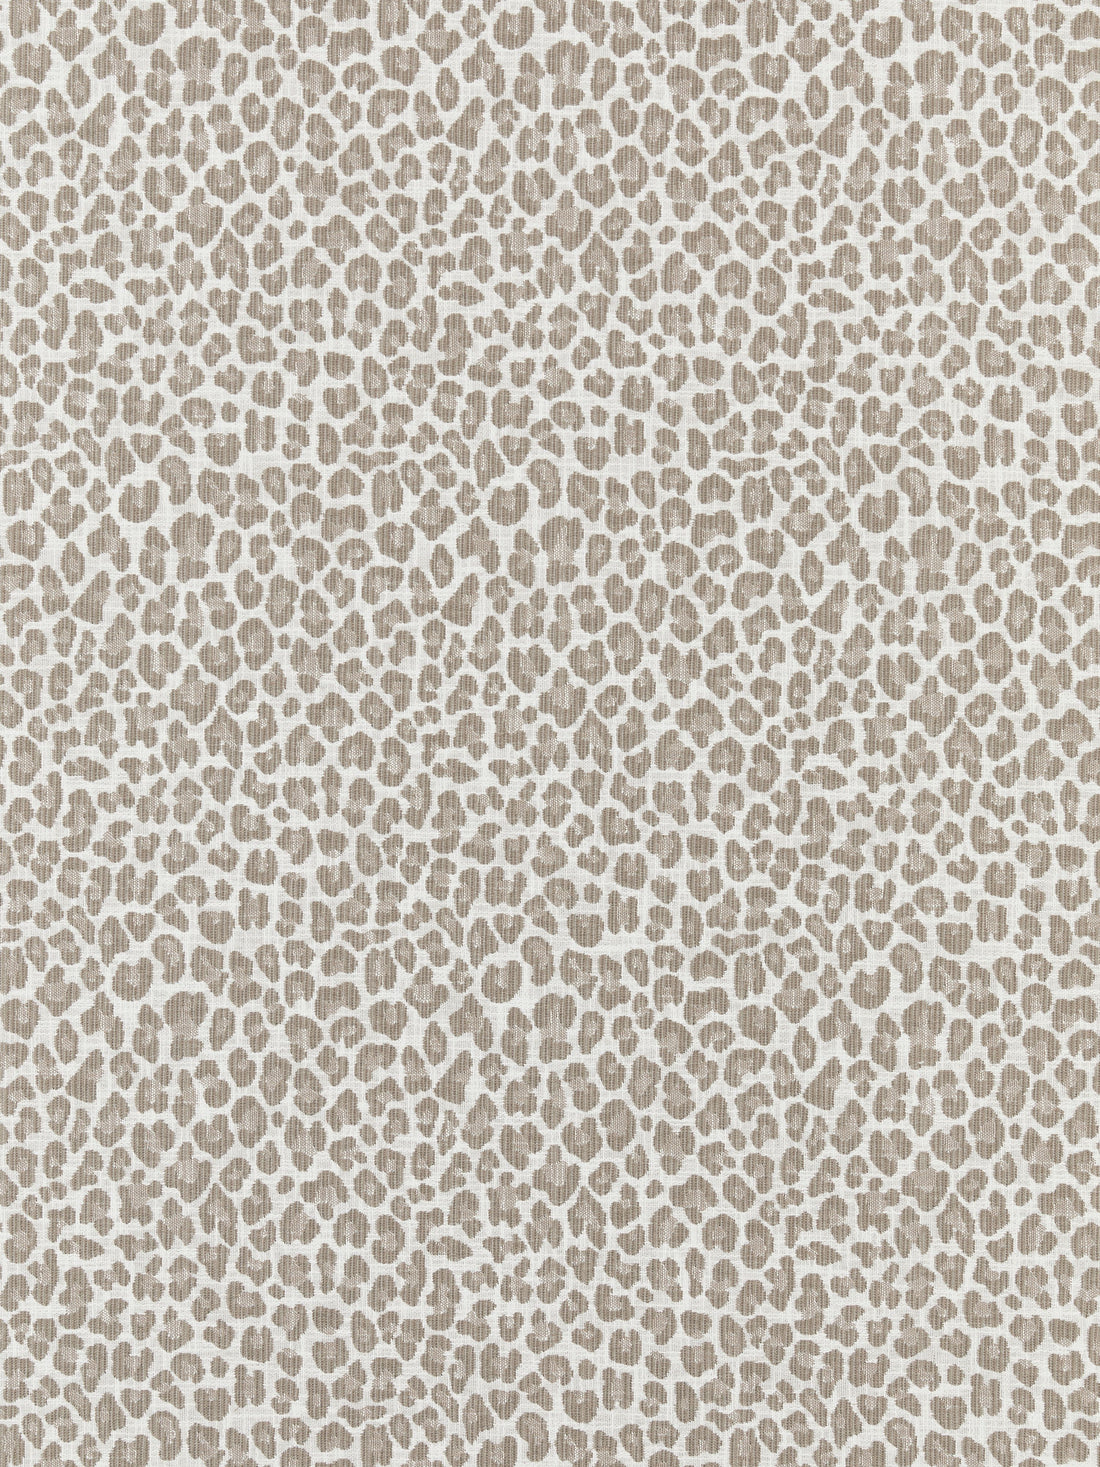 Backyard Bengal fabric in limestone color - pattern number SC 000127316 - by Scalamandre in the Scalamandre Fabrics Book 1 collection